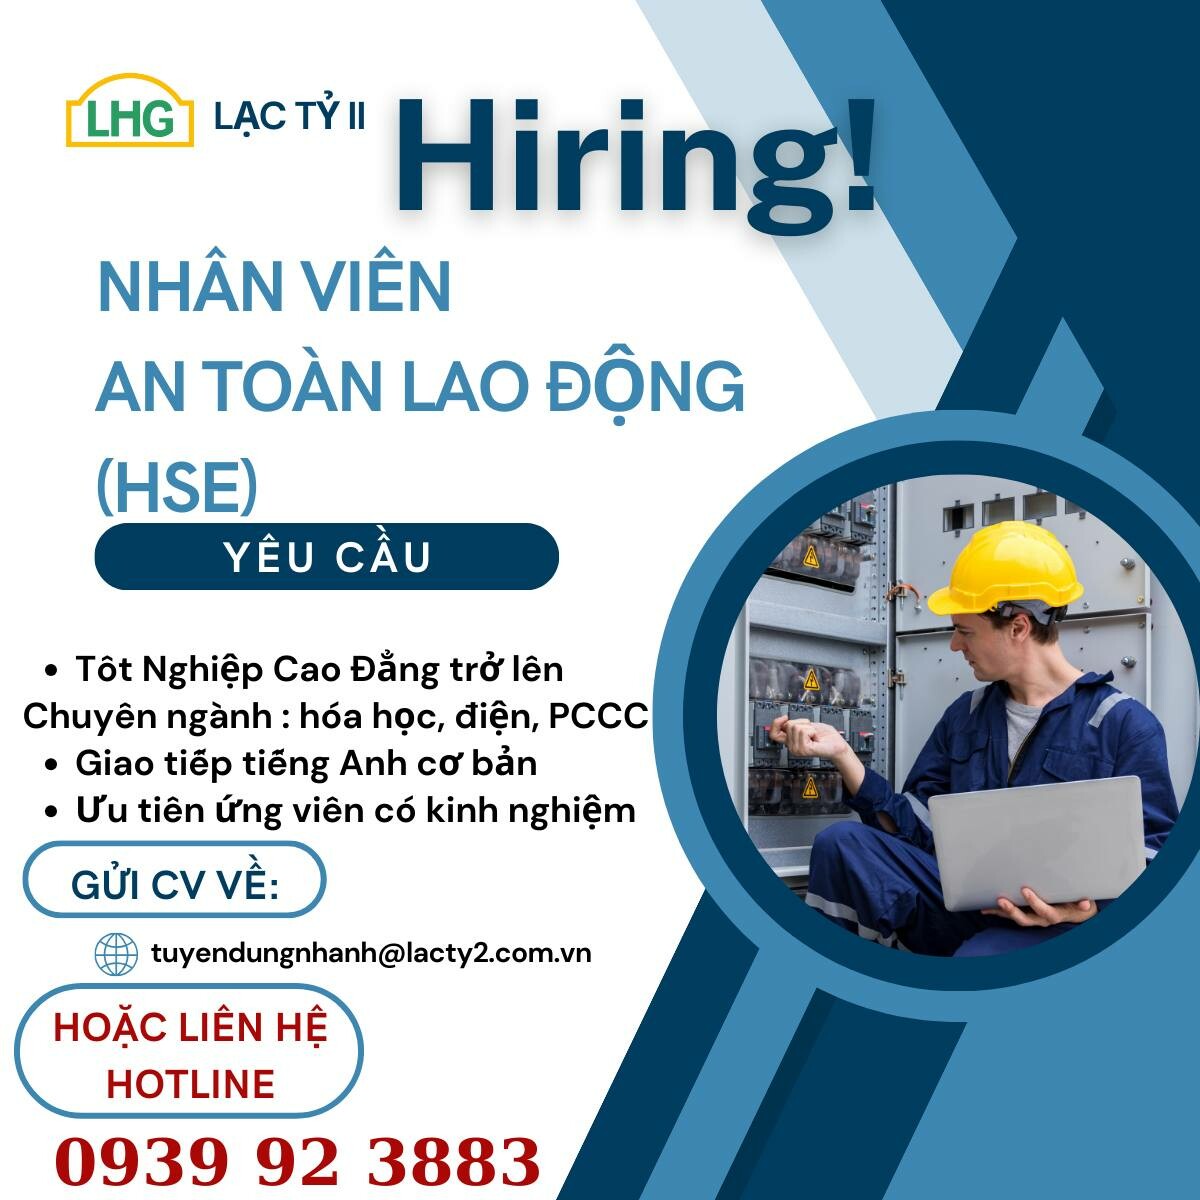 Cover image for Công ty TNHH Lạc Tỷ II